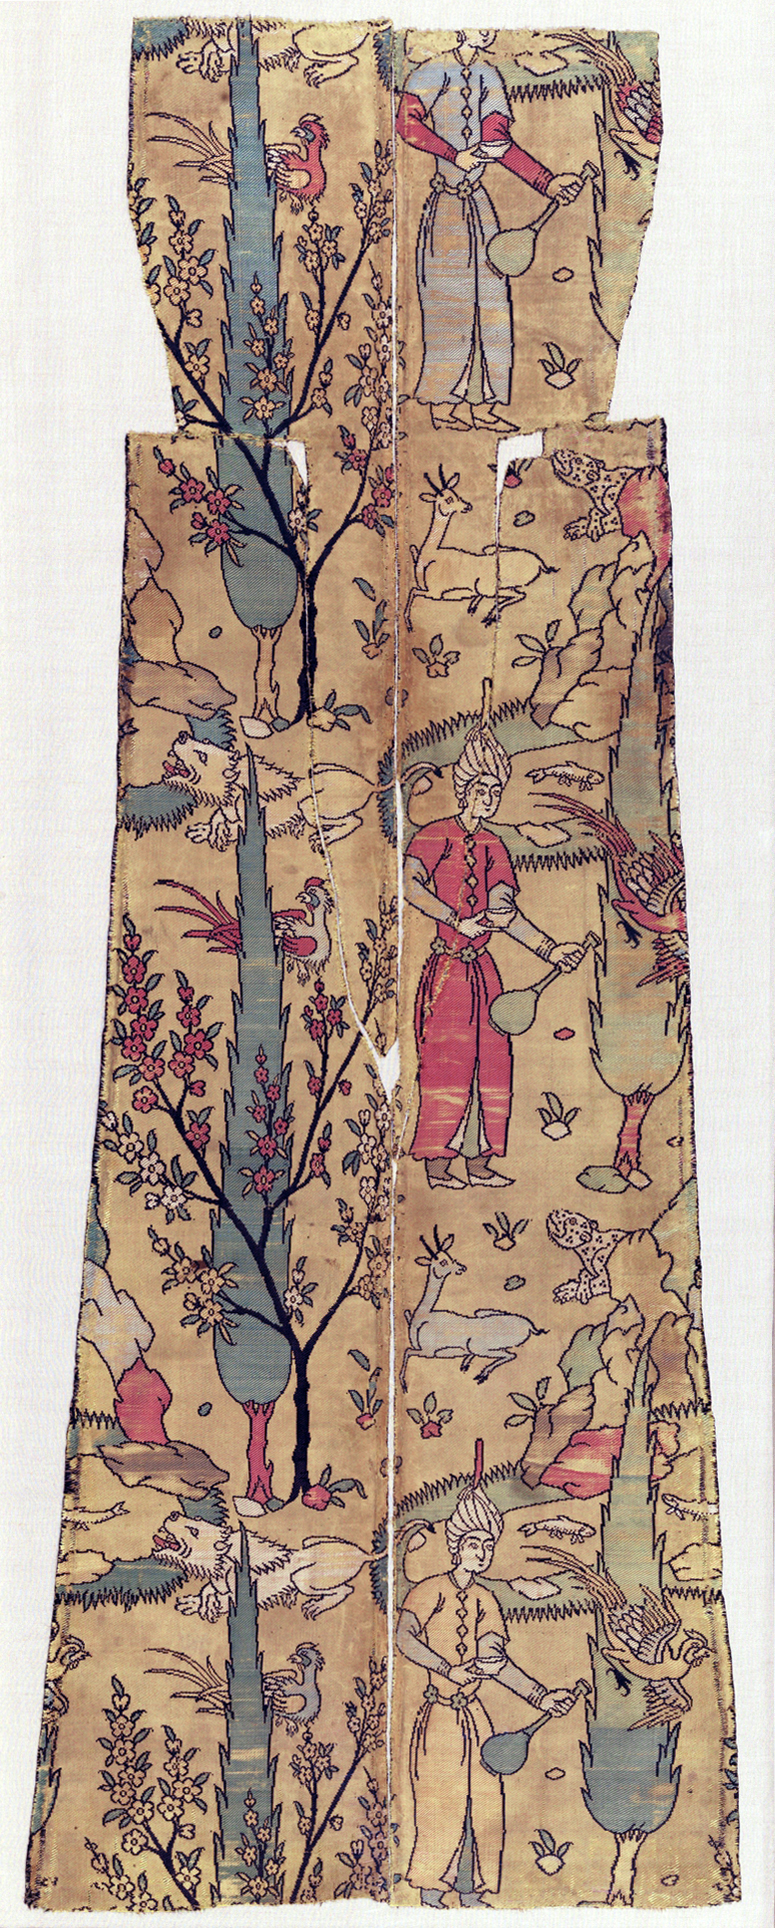 Textile Fragment Depicting a Figure in a Landscape (attrributed to Iran), 16th century, silk (lampas), 101.6 x 36.8 cm (The Metropolitan Museum of Art)